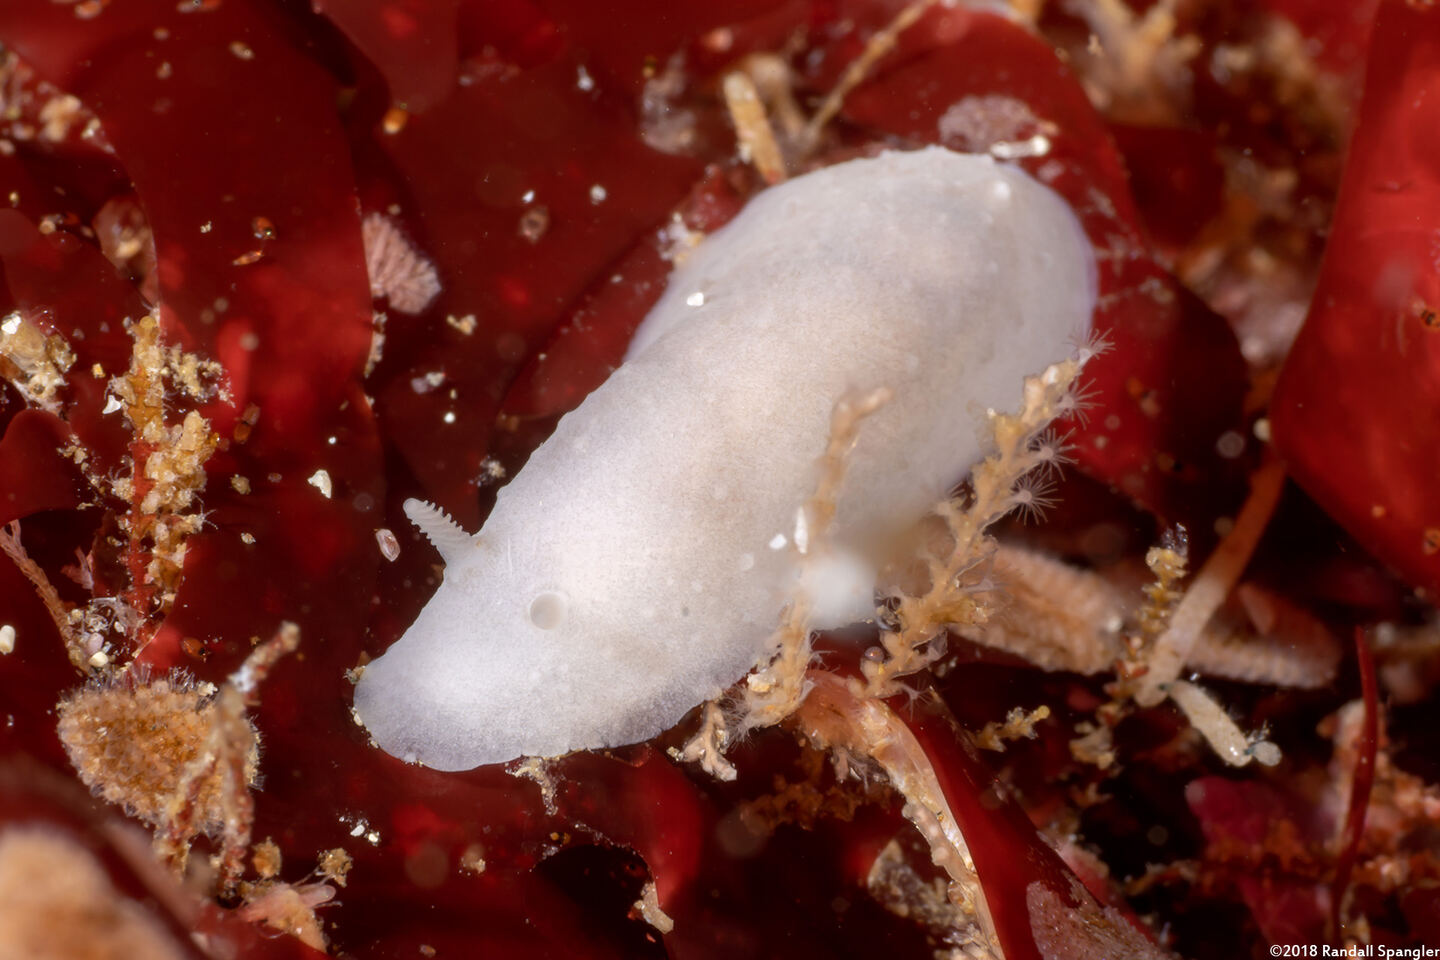 Phyllidiopsis blanca (White Phyllidid)